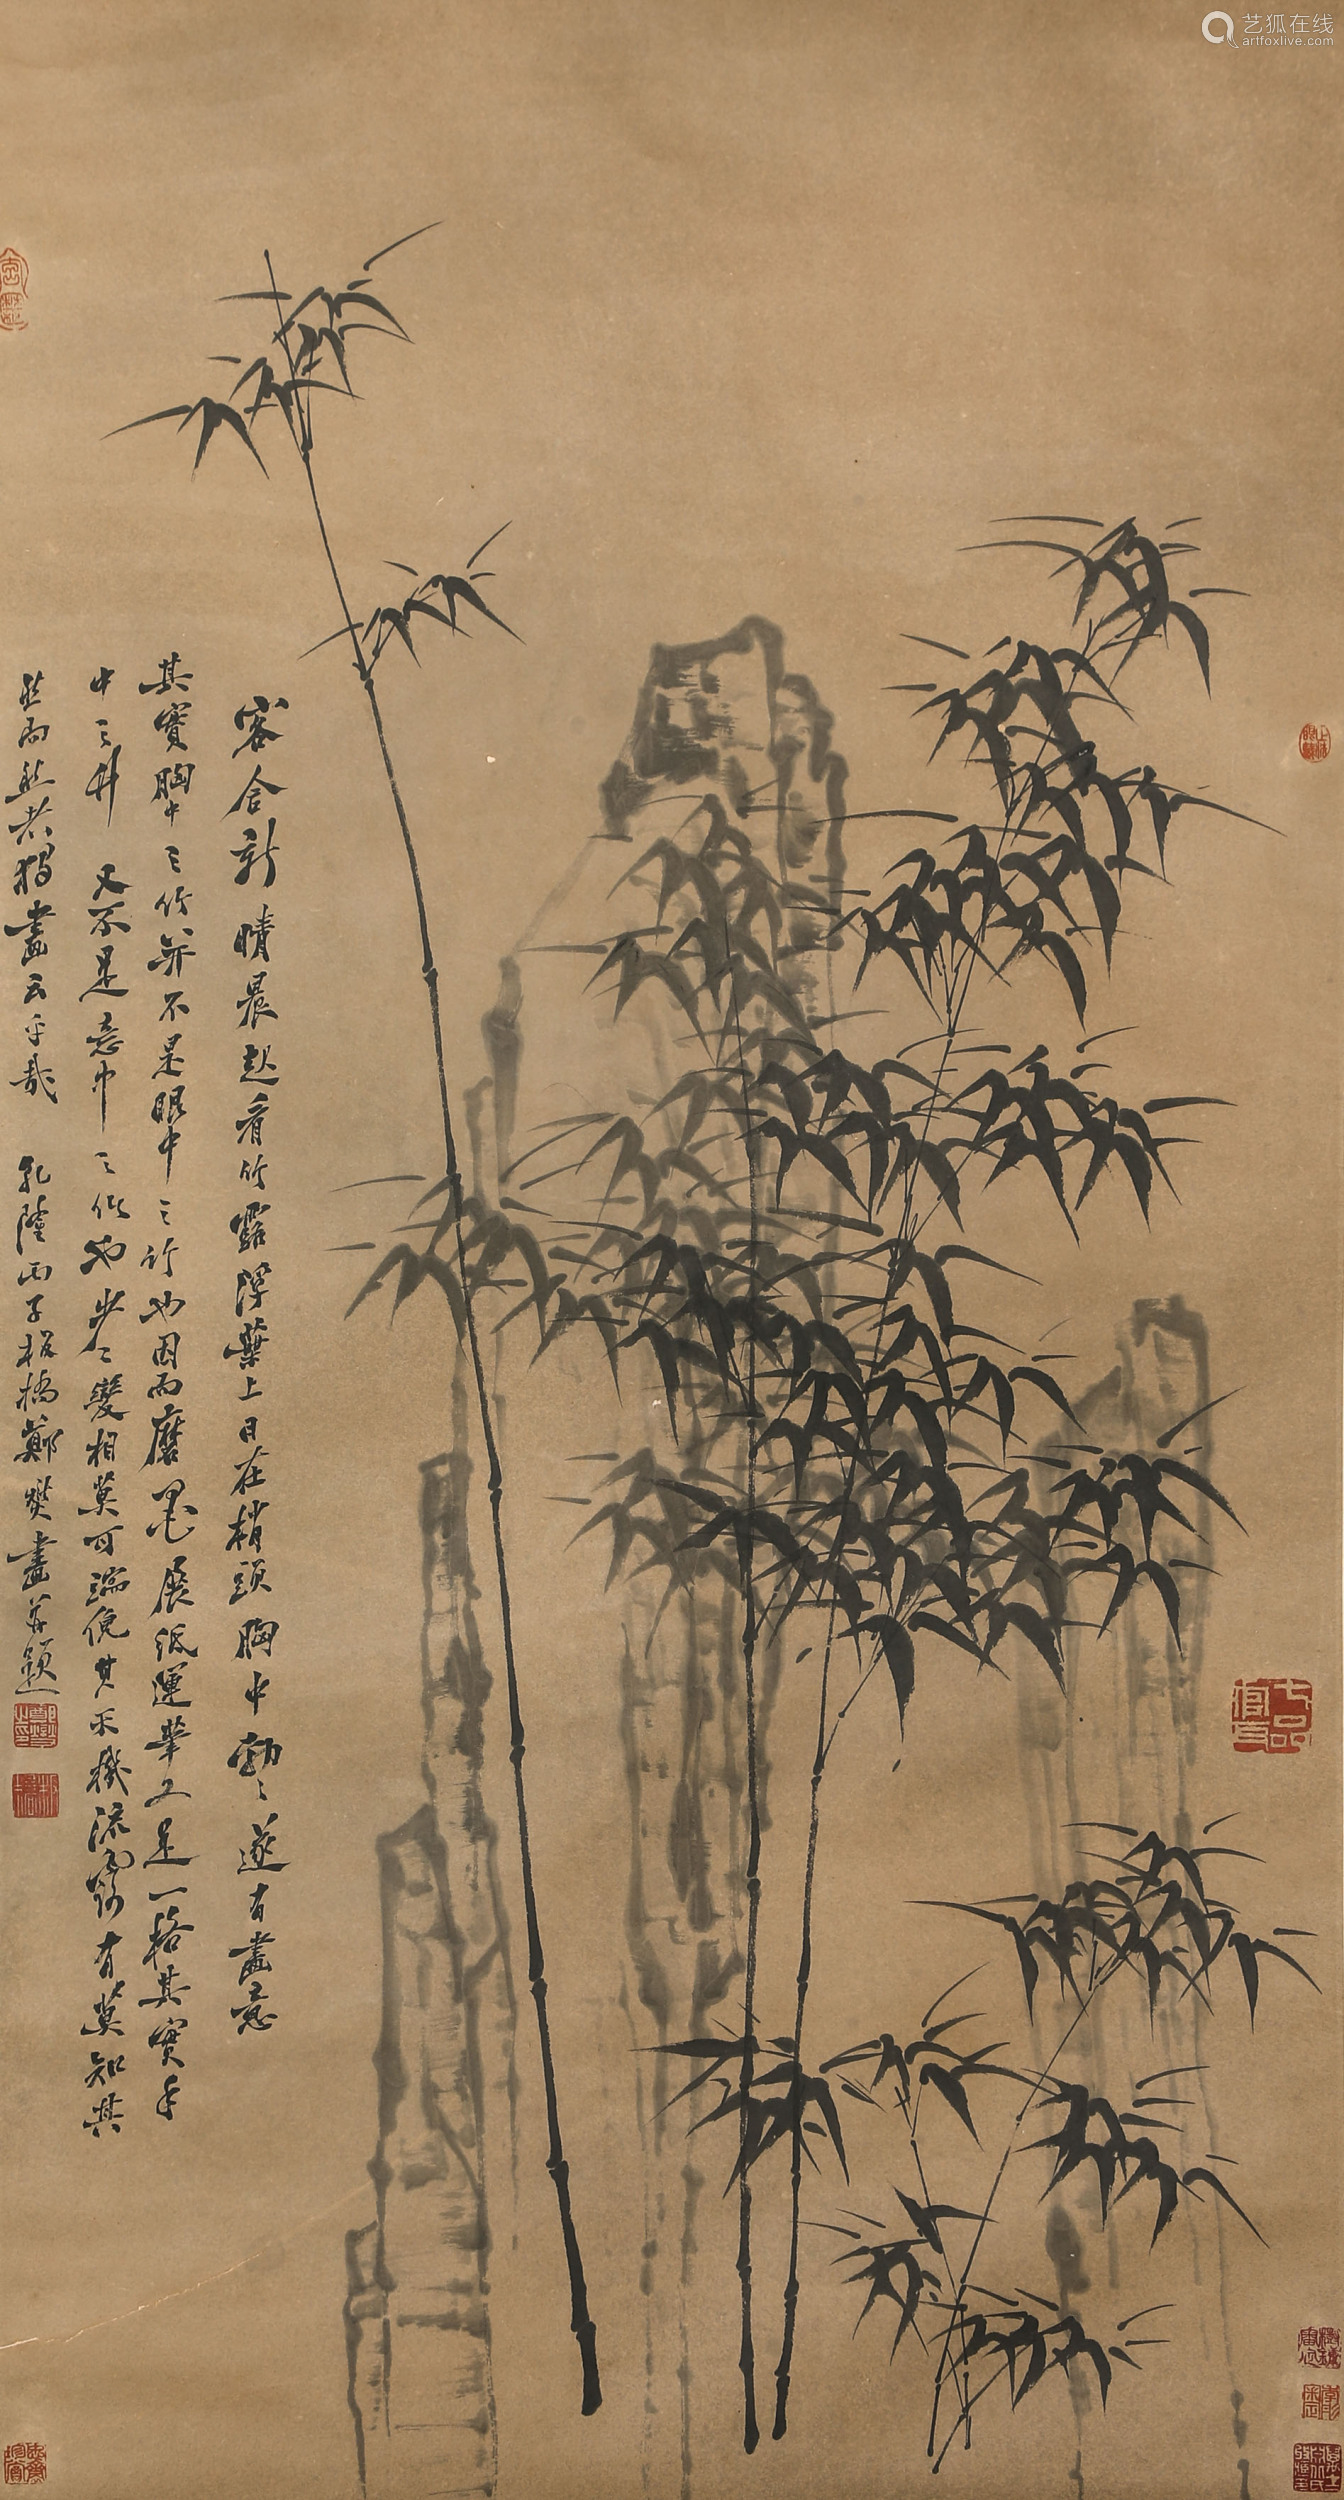 Chinese ink painting,
Zheng Banqiao's Ink Bamboo Drawings